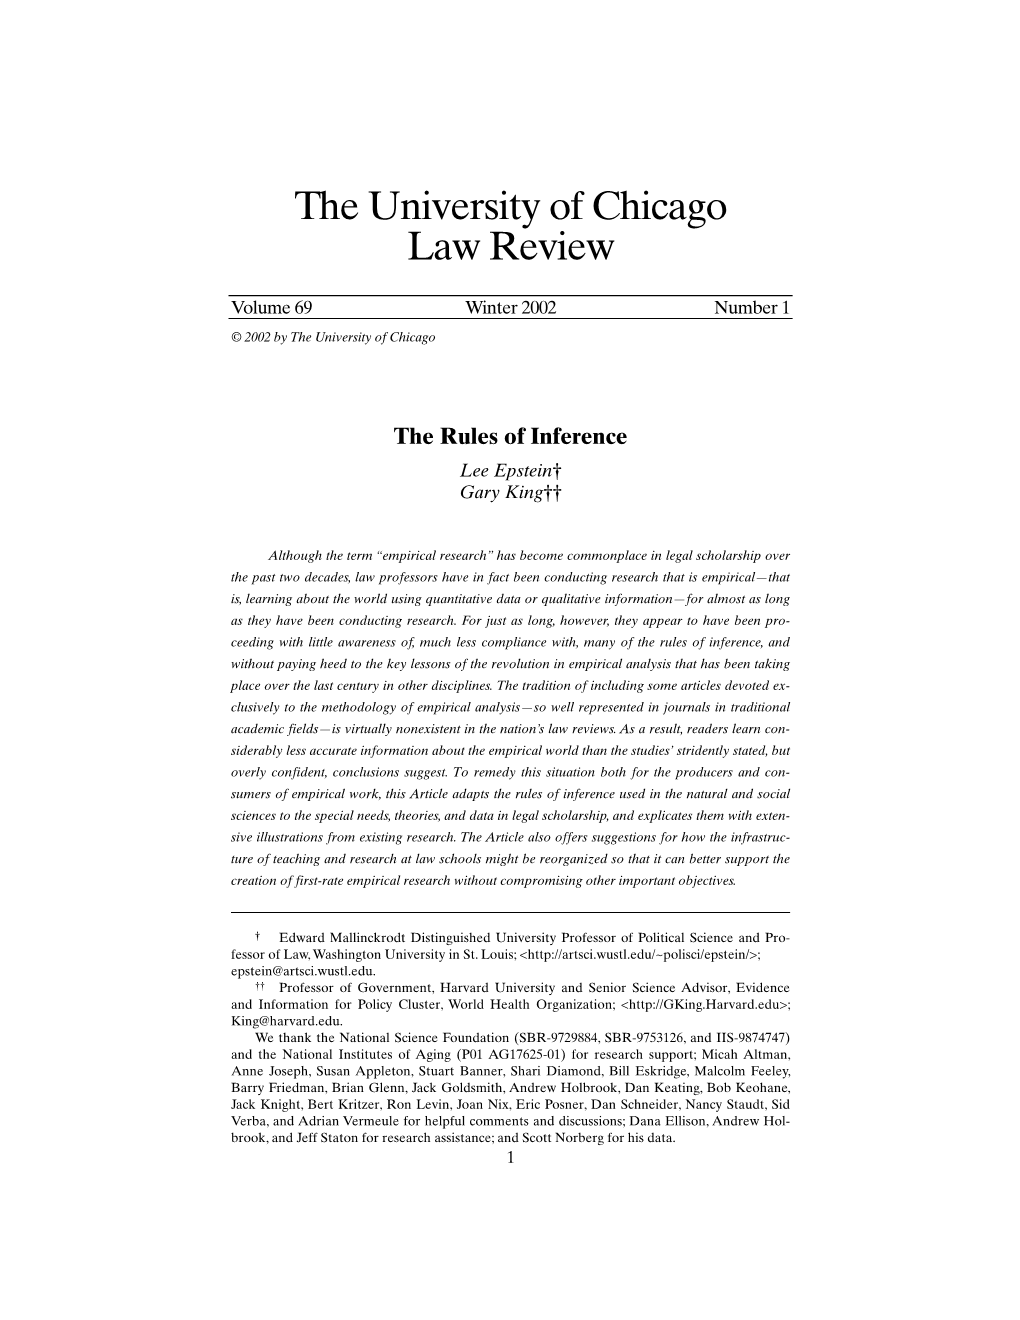 The University of Chicago Law Review